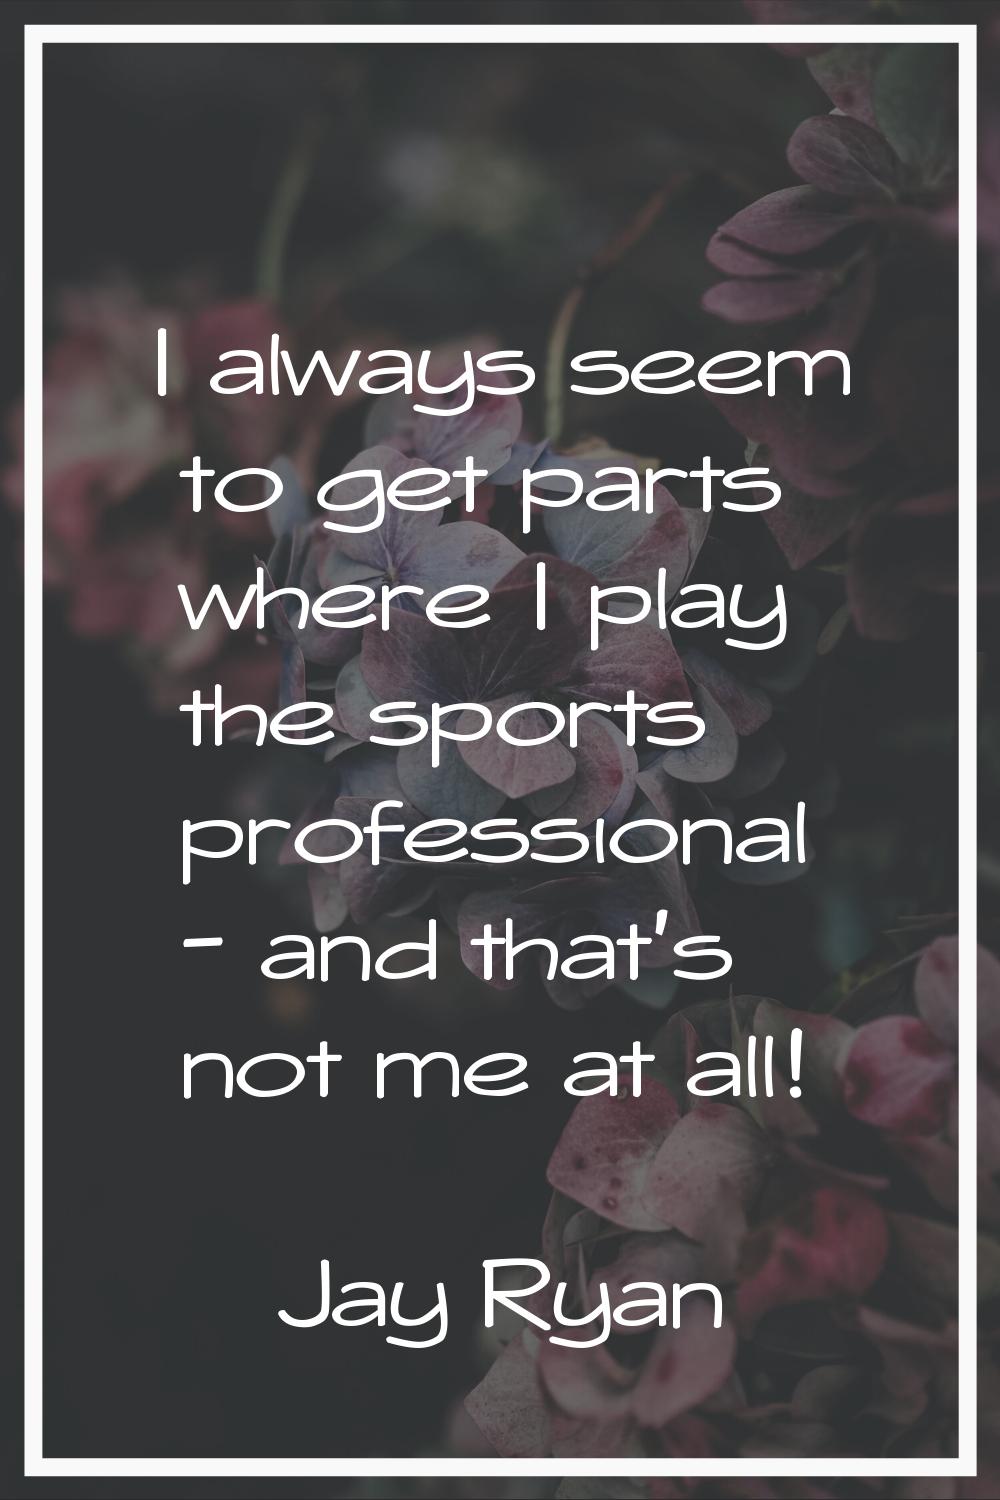 I always seem to get parts where I play the sports professional - and that's not me at all!